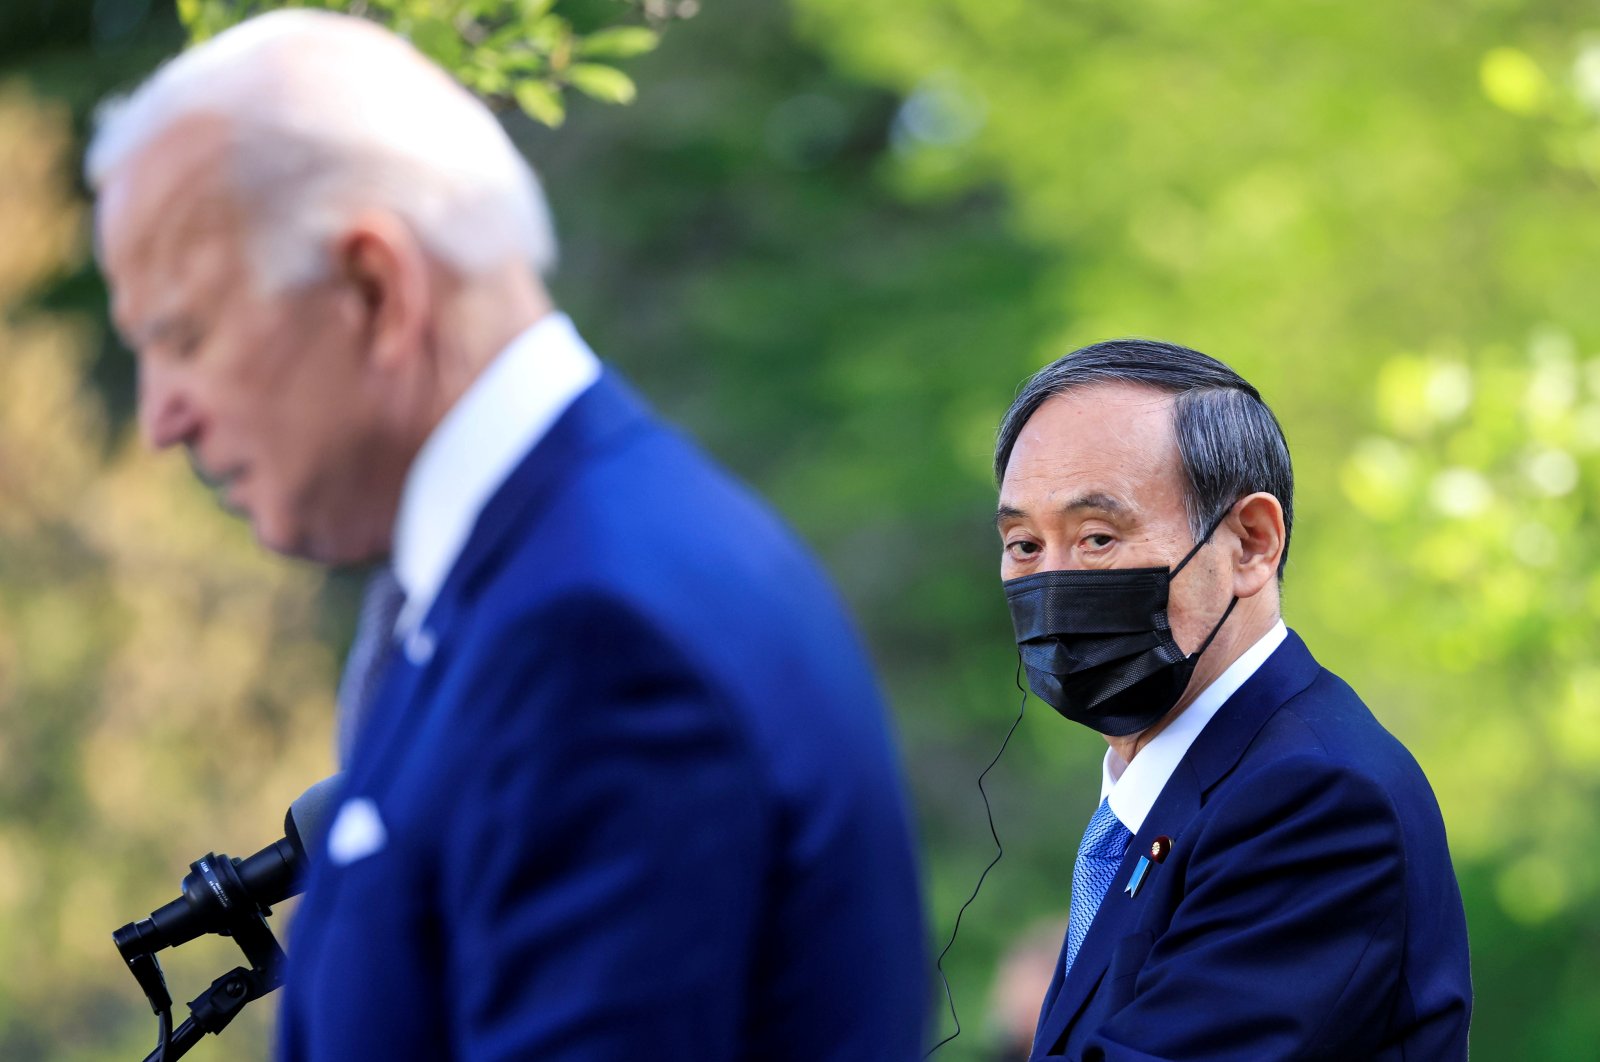 U.S. President Joe Biden holds a joint news conference with Japan's Prime Minister Yoshihide Suga in the Rose Garden at the White House in Washington, D.C., U.S., April 16, 2021. (Reuters File Photo)